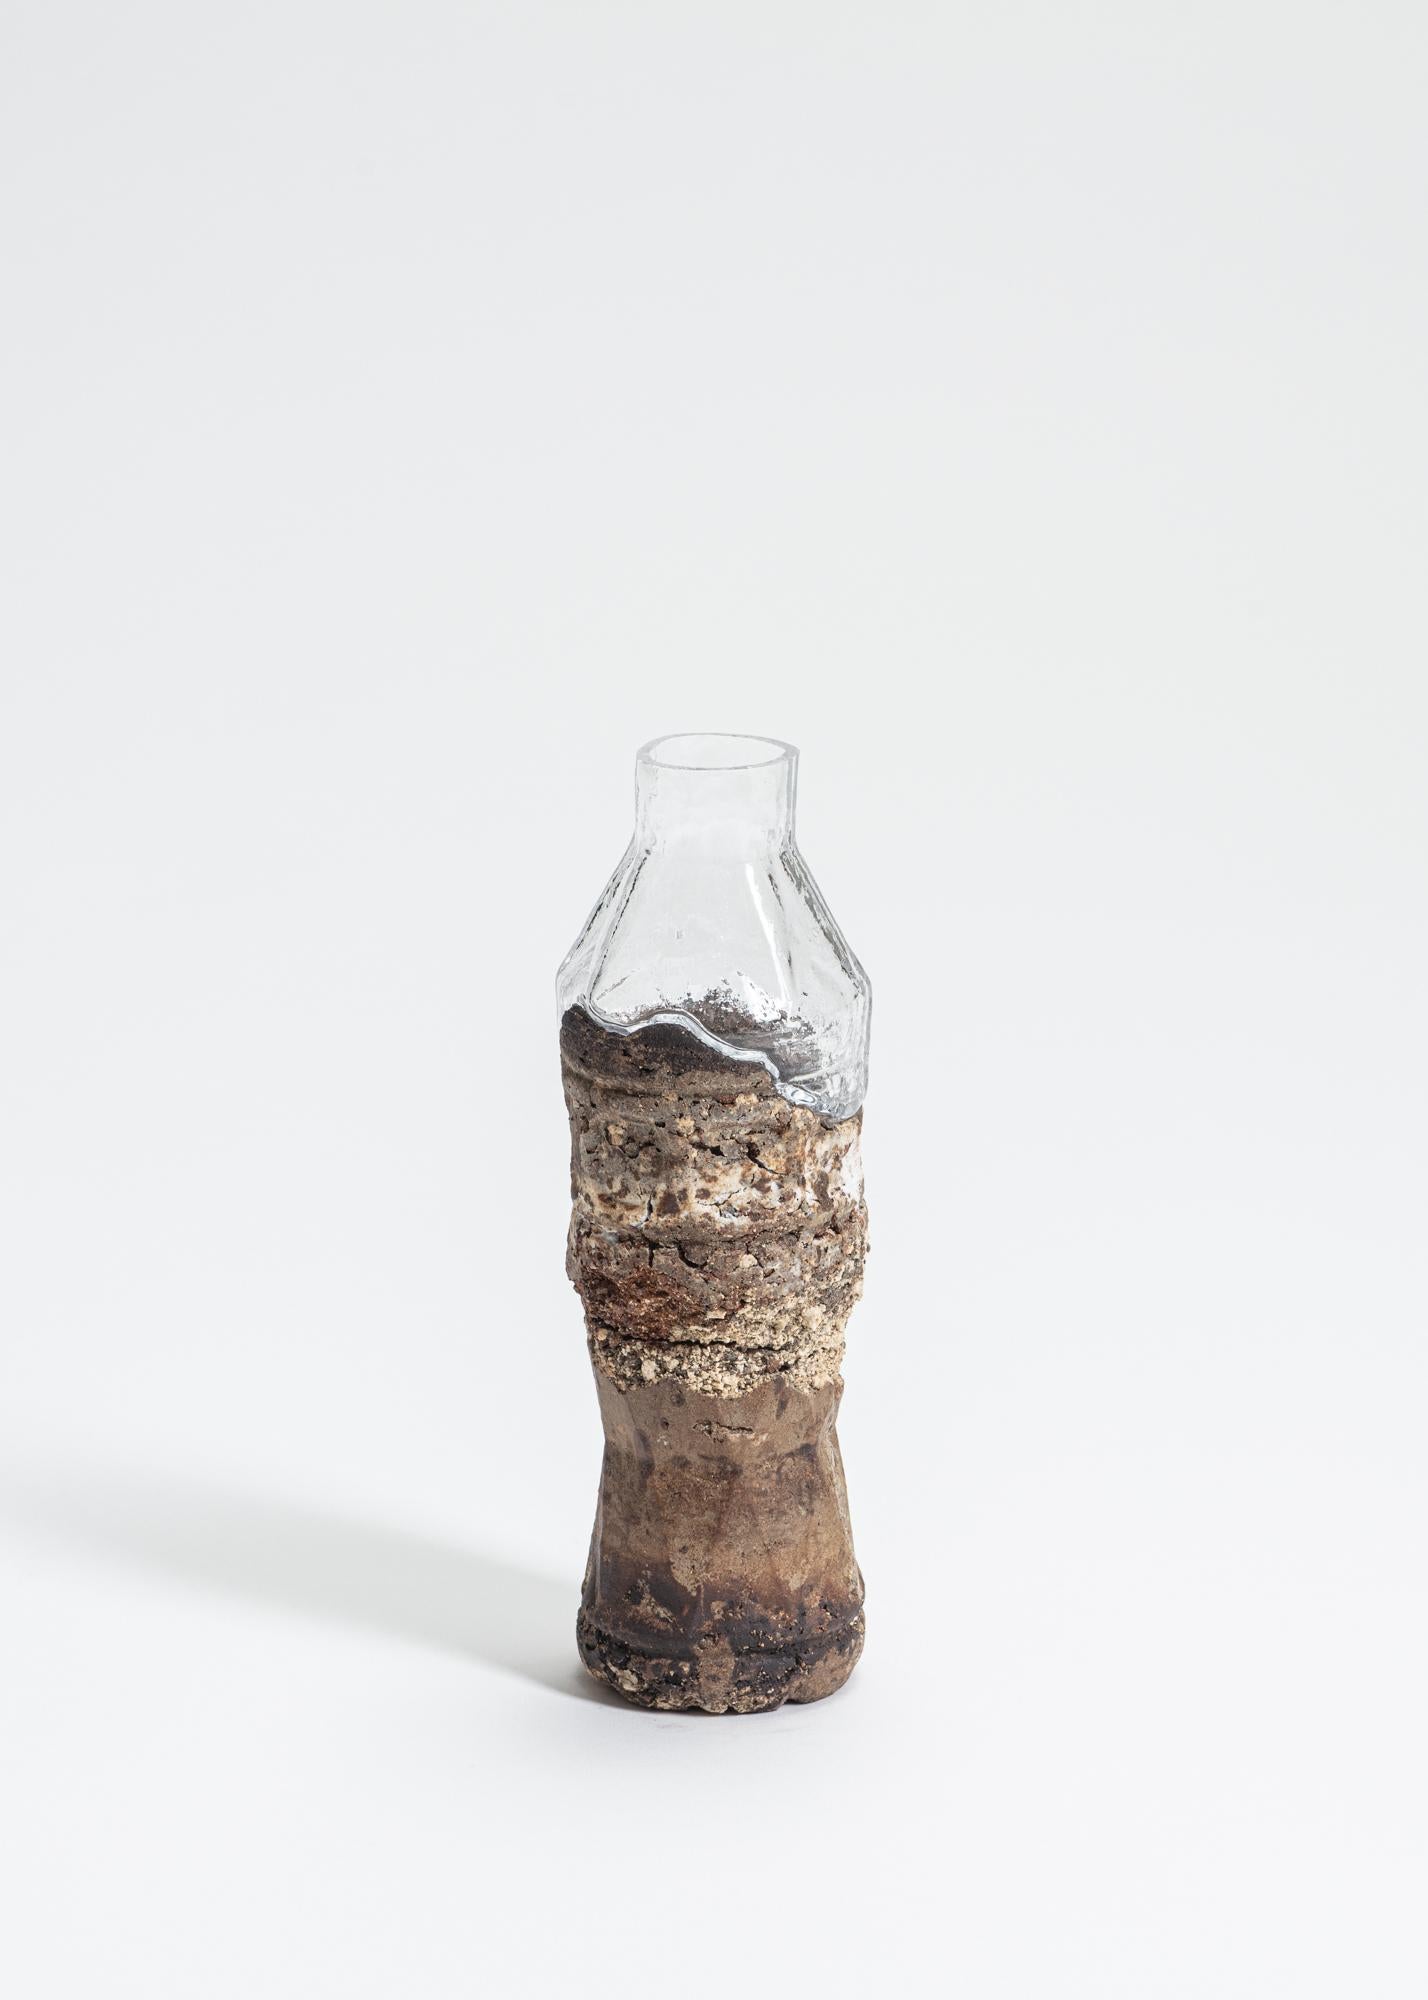 FUWA FUWA, No 8 Bottle by Yusuké Y. Offhause
One of a Kind, the work is in two parts (ceramic and glass).
Dimensions: D 6 x W 6 x H 20 cm.
Materials: stoneware, porcelain, glass.

Yusuké Y. Offhause:
